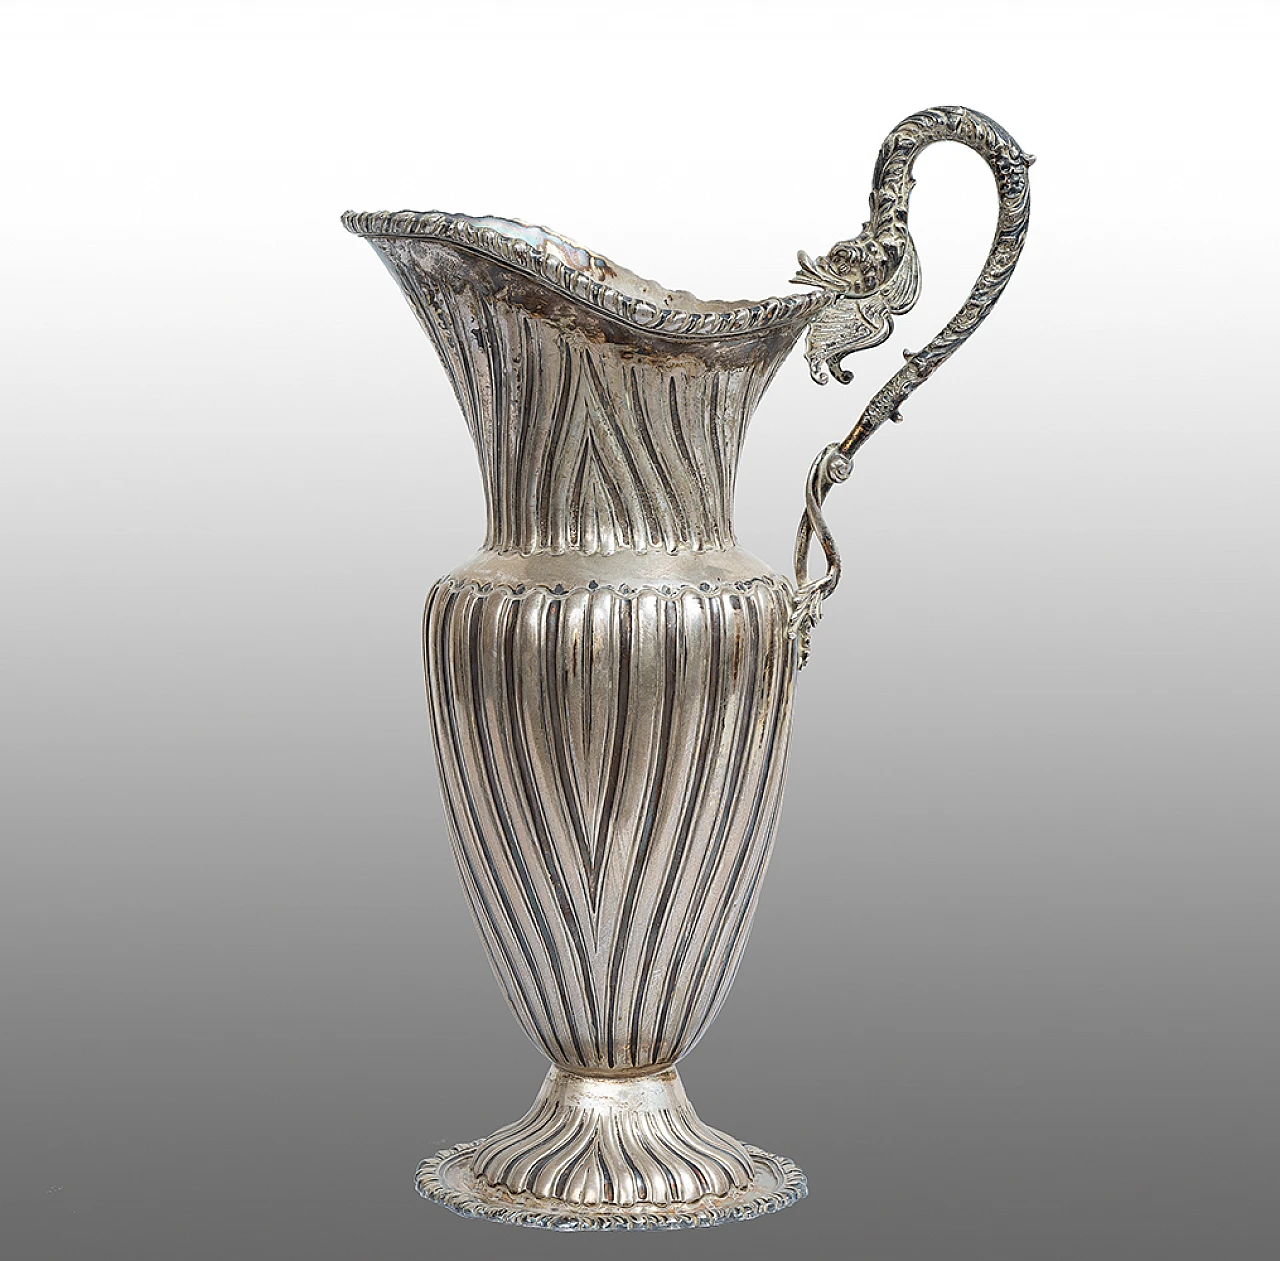 Silver sinusoidal-shaped jug with thick chisel on the edge 1